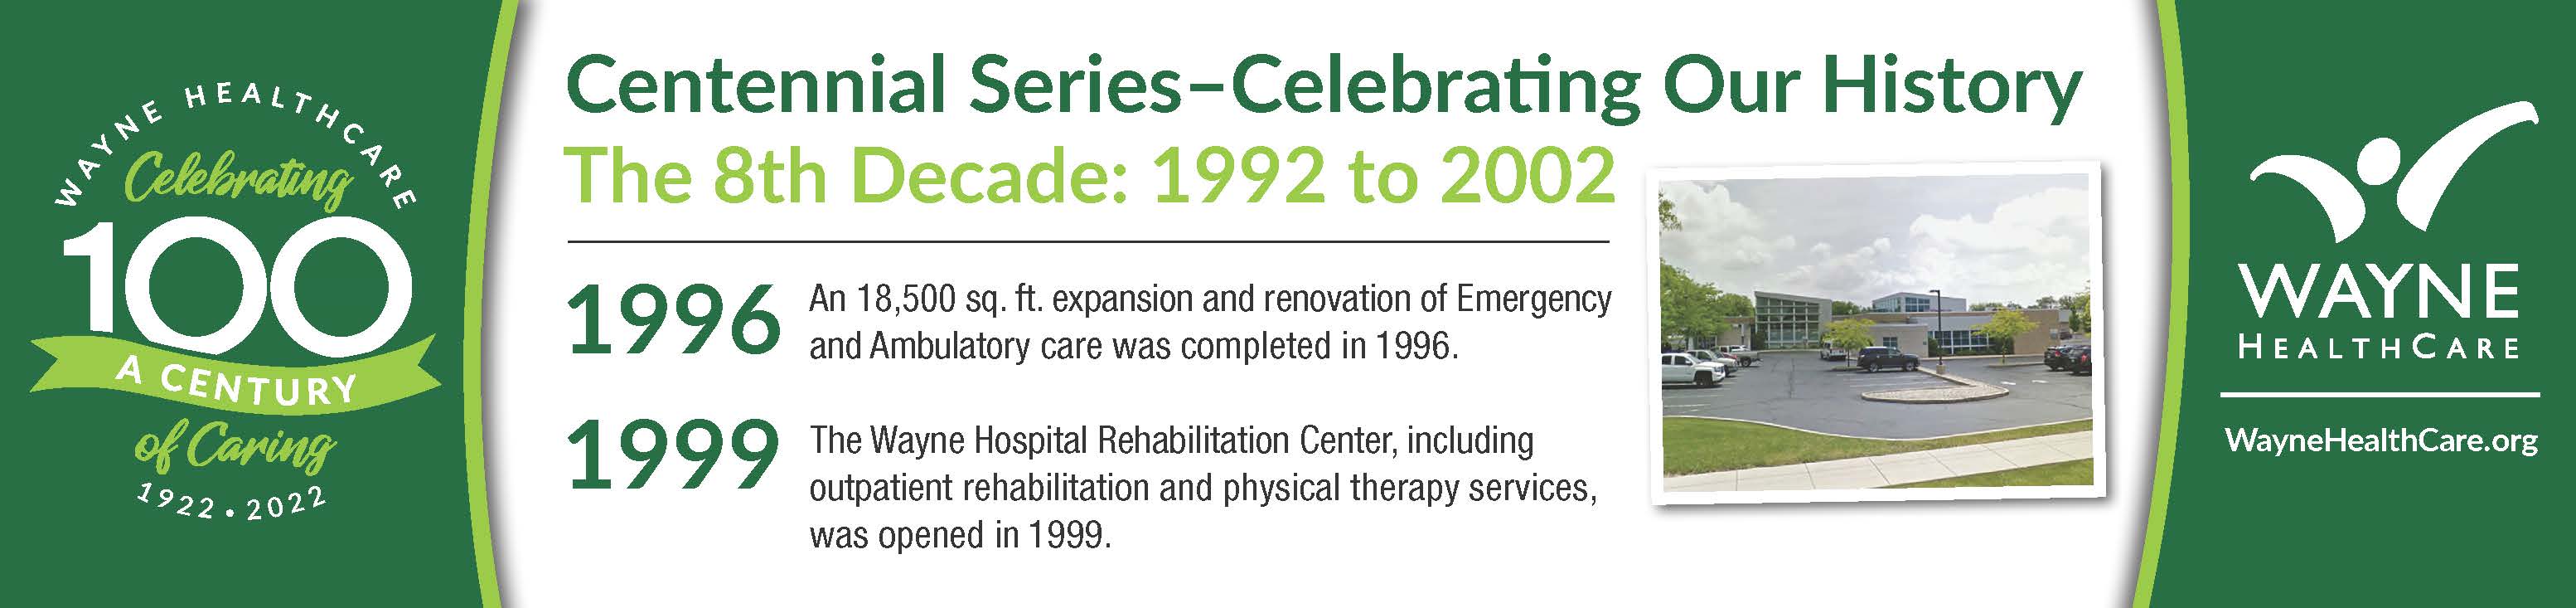 8th Decade Centennial  information about Wayne HealthCare picture of rehabilitation center